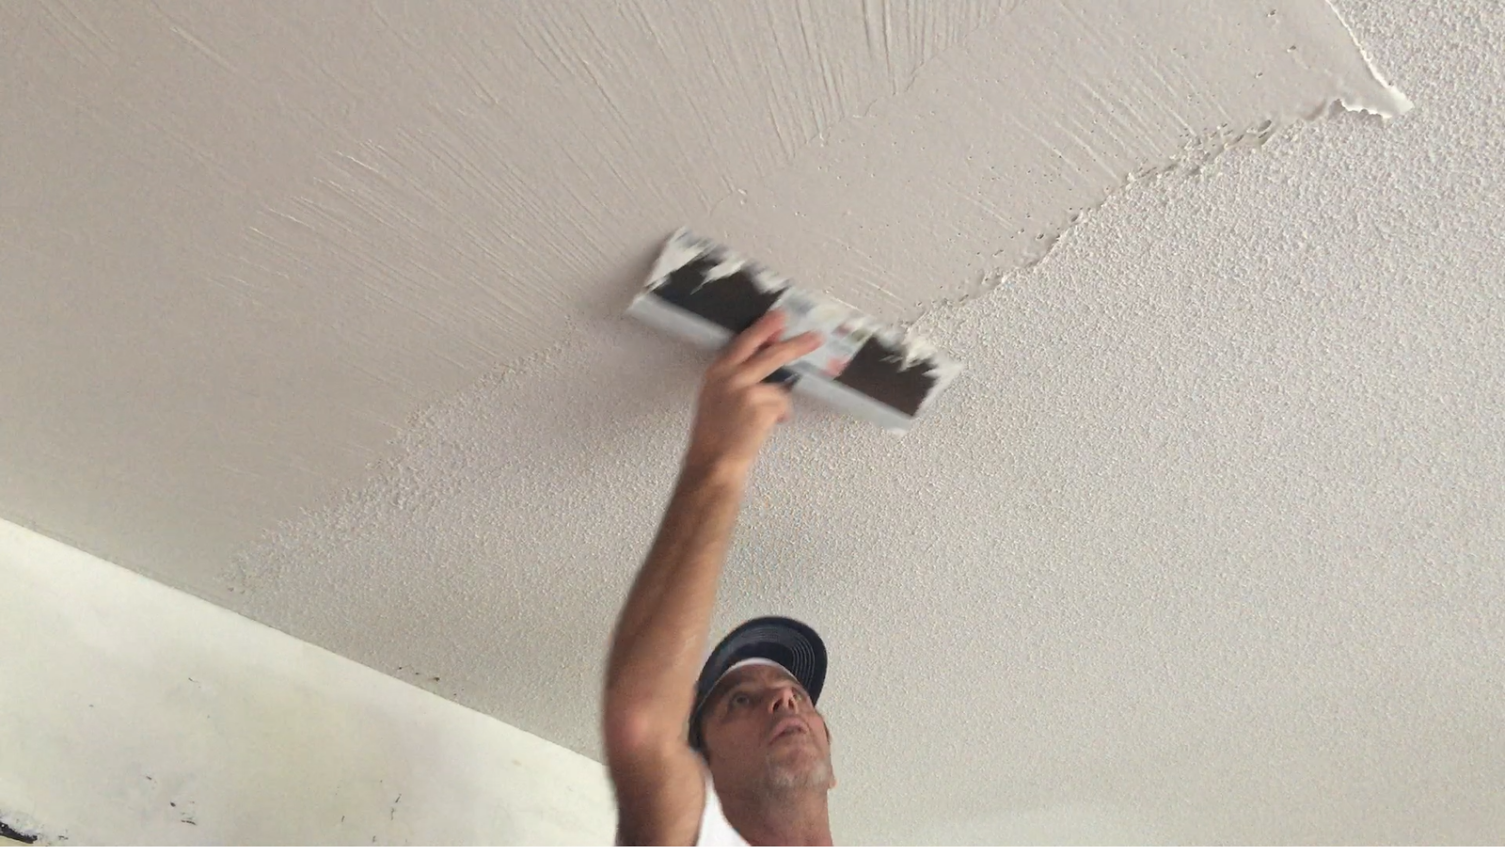 Popcorn Ceiling Removal Cost, How Much Should Popcorn Ceiling Removal Cost